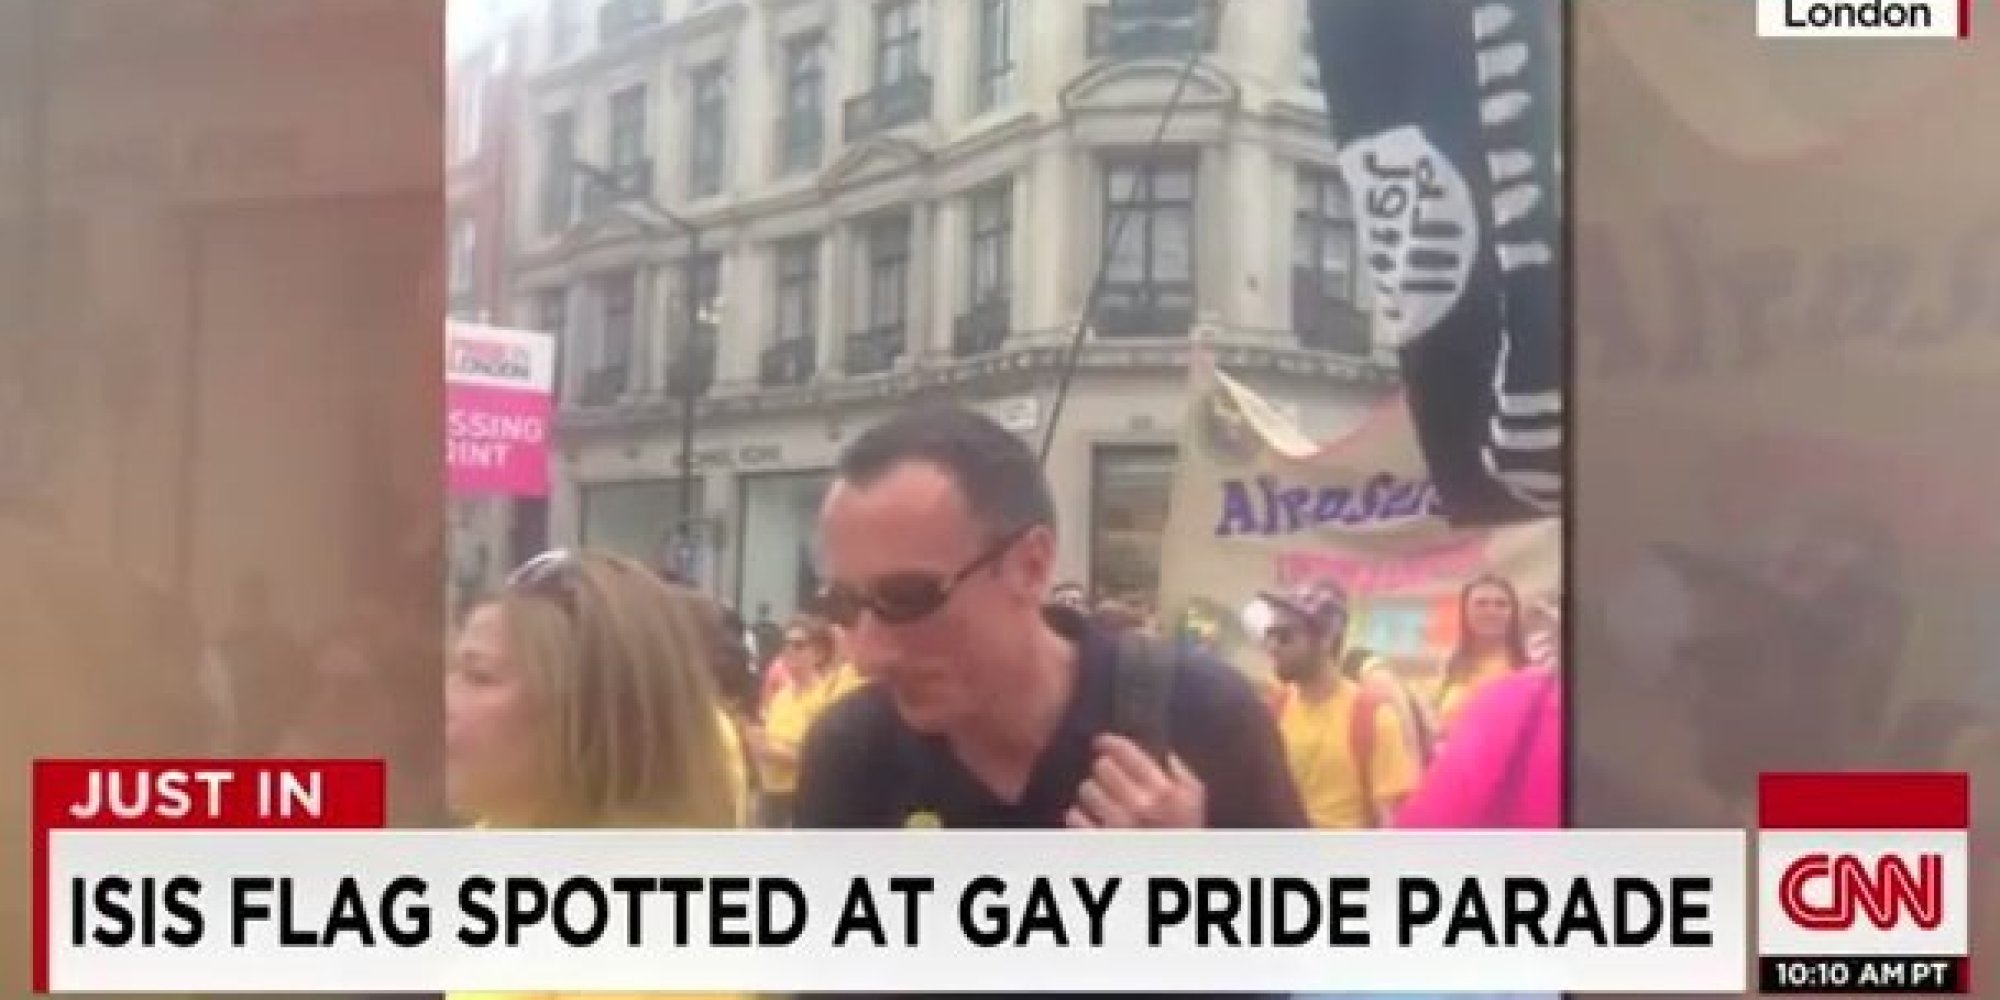 Cnn Mistakes Sex Toy Flag For Isis Flag At London Gay Pride Huffpost